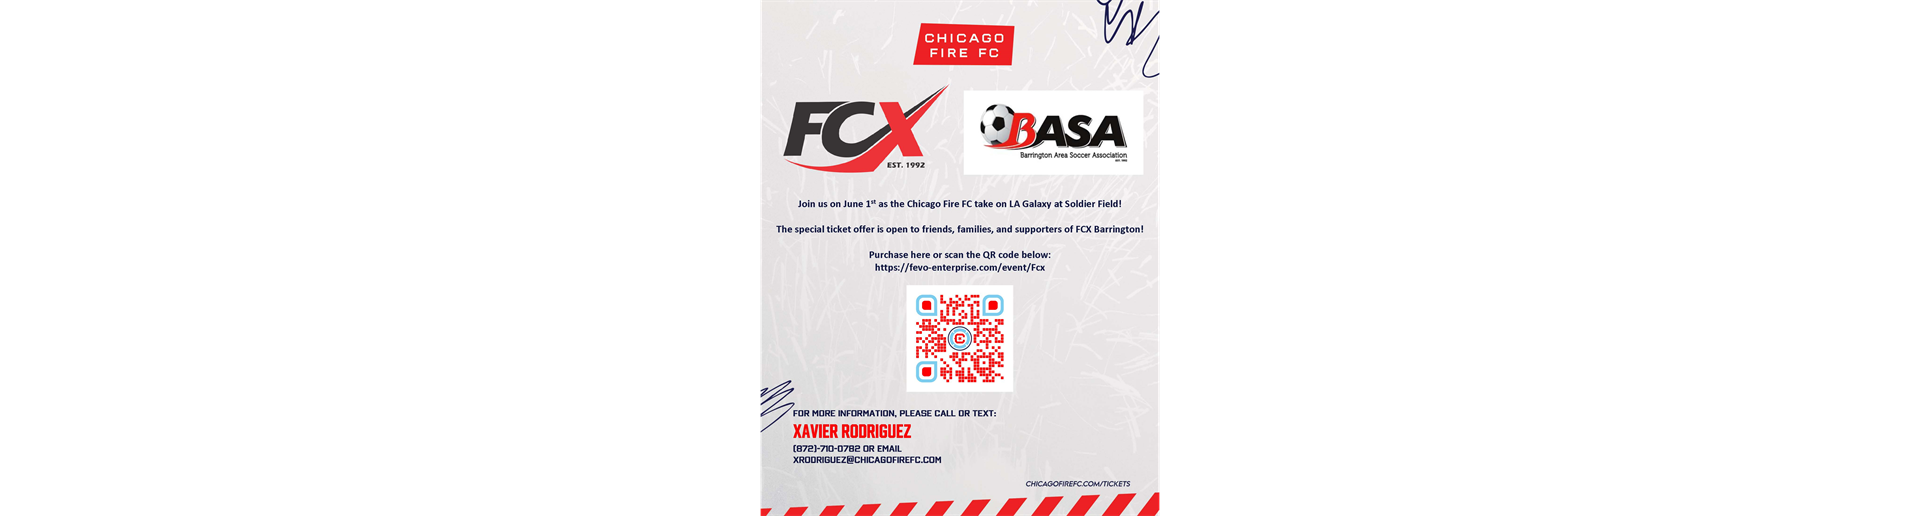 BASA/FCX NIGHT AT CHICAGO FIRE- CLICK PIC FOR TICKETS